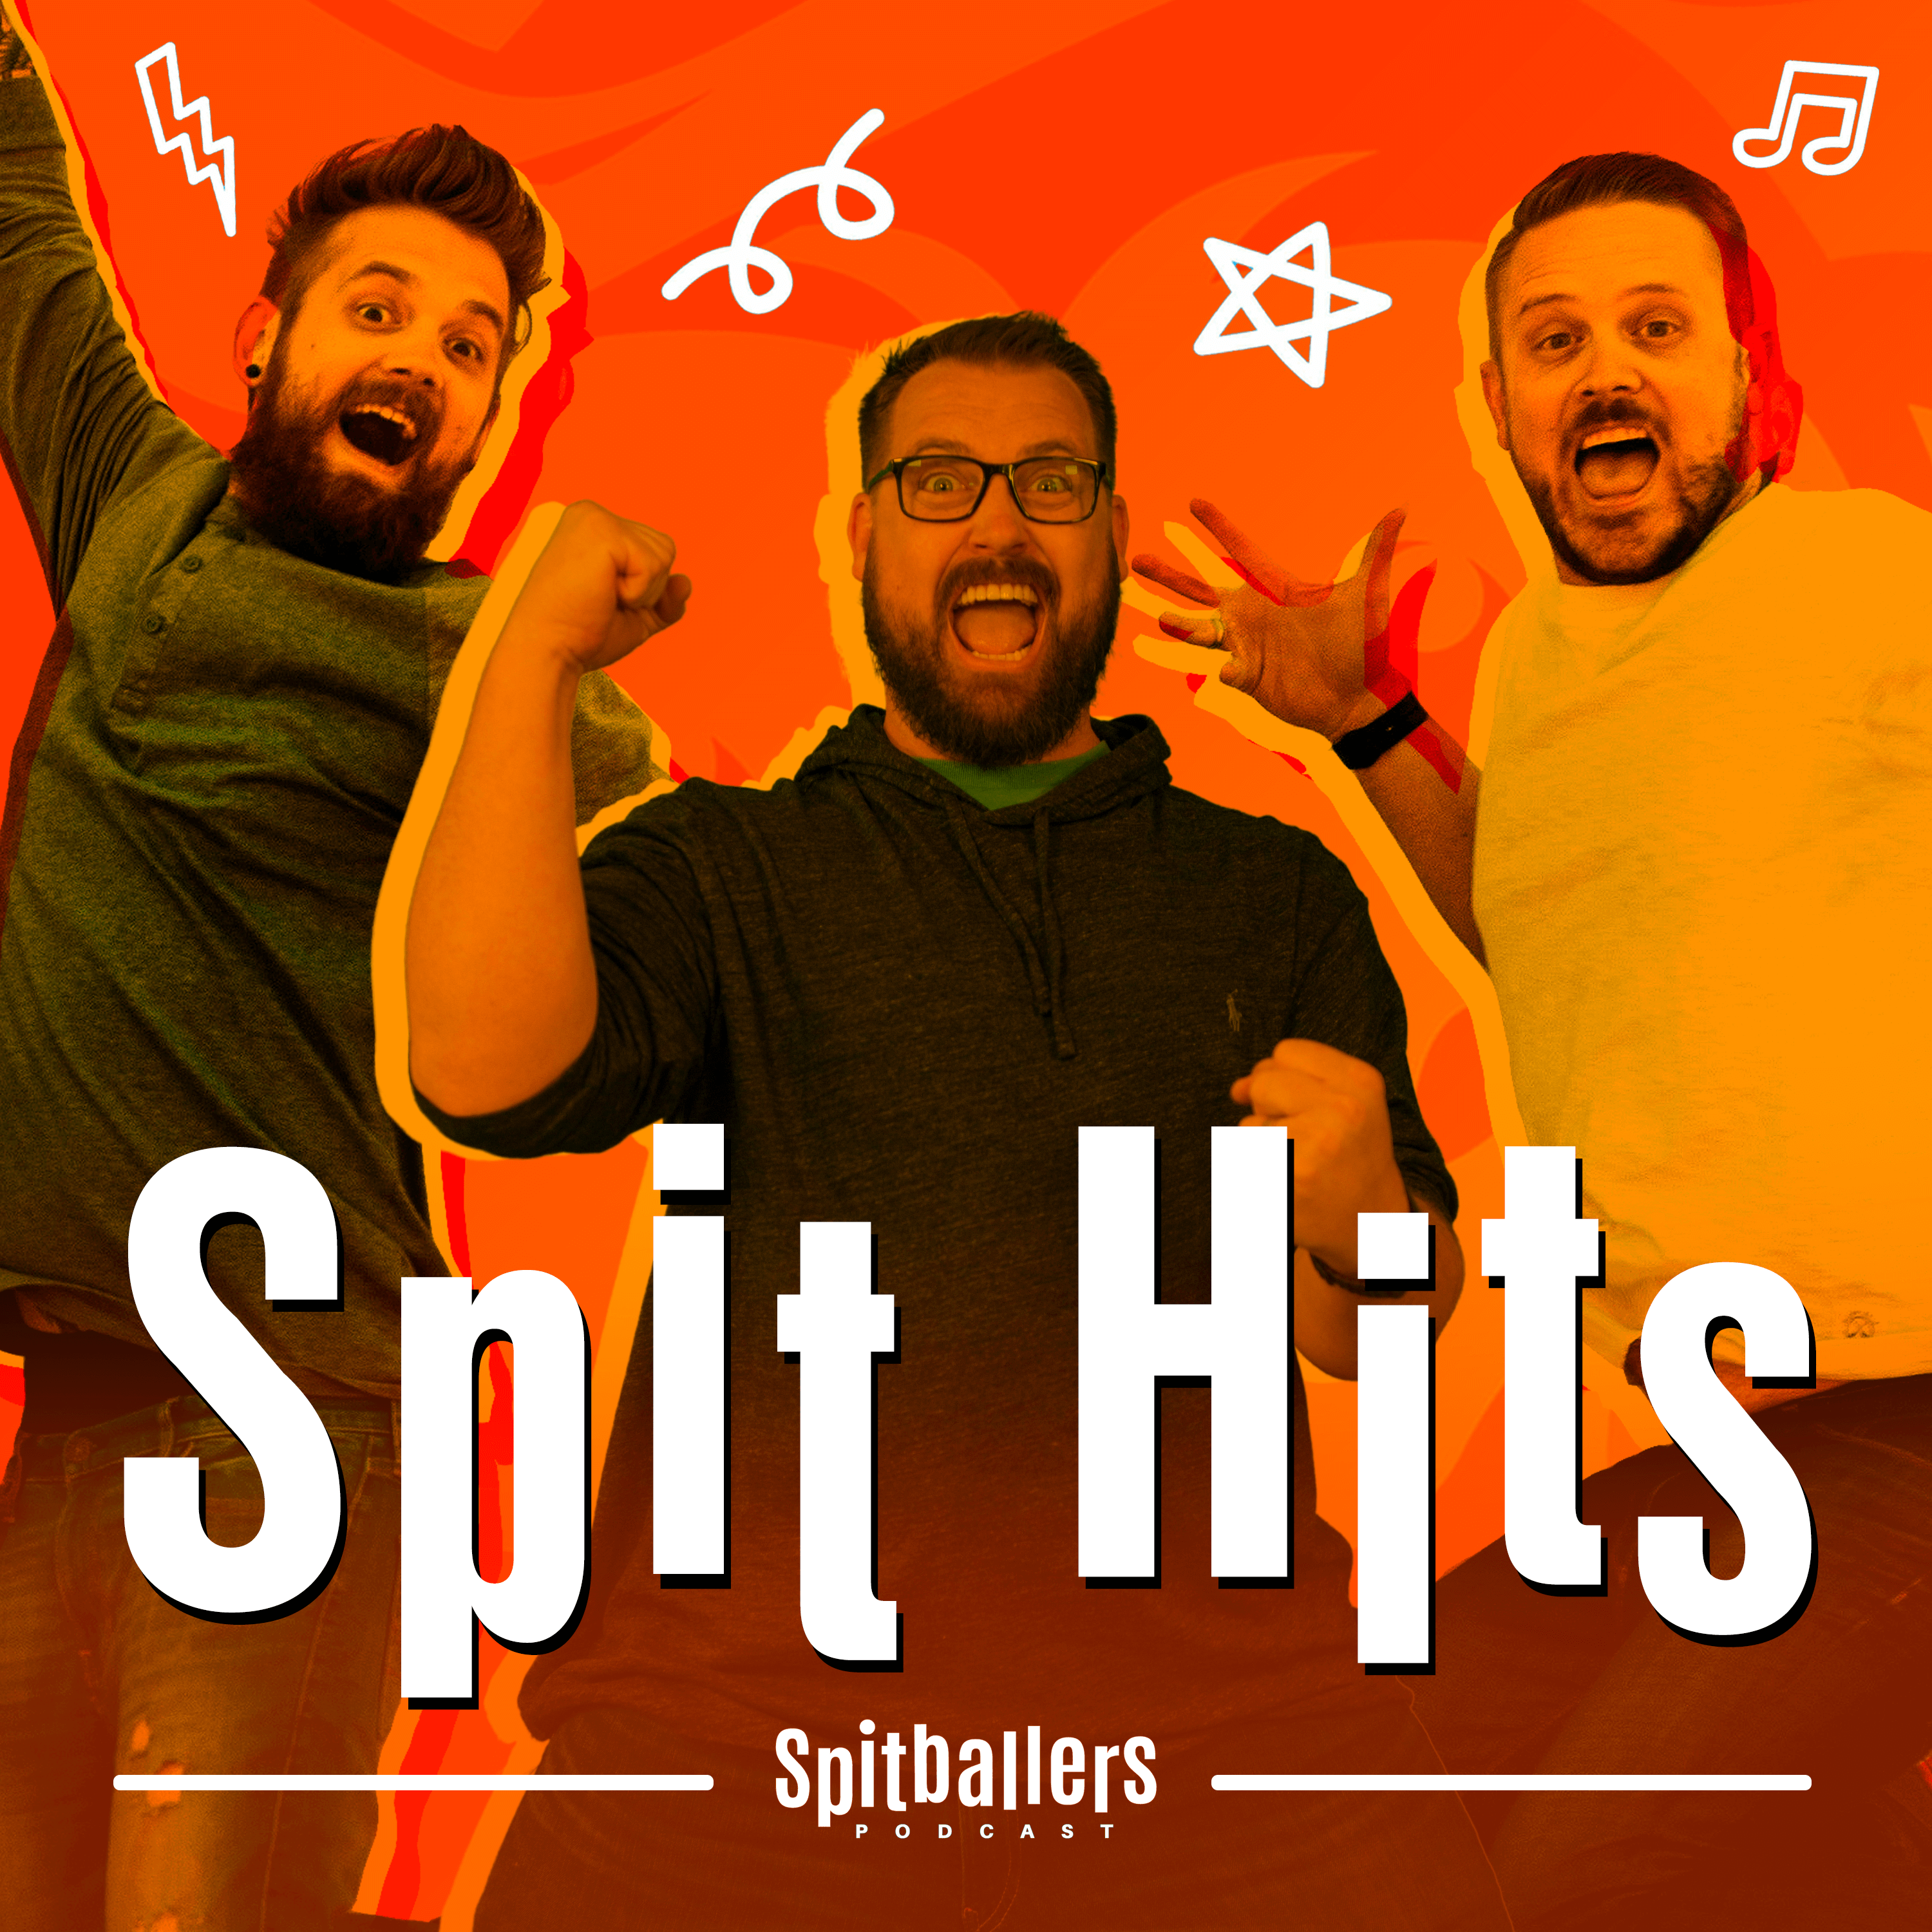 Spit Hits: Bathroom Confessions & Boring Things - Comedy Podcast - Comedy Podcast